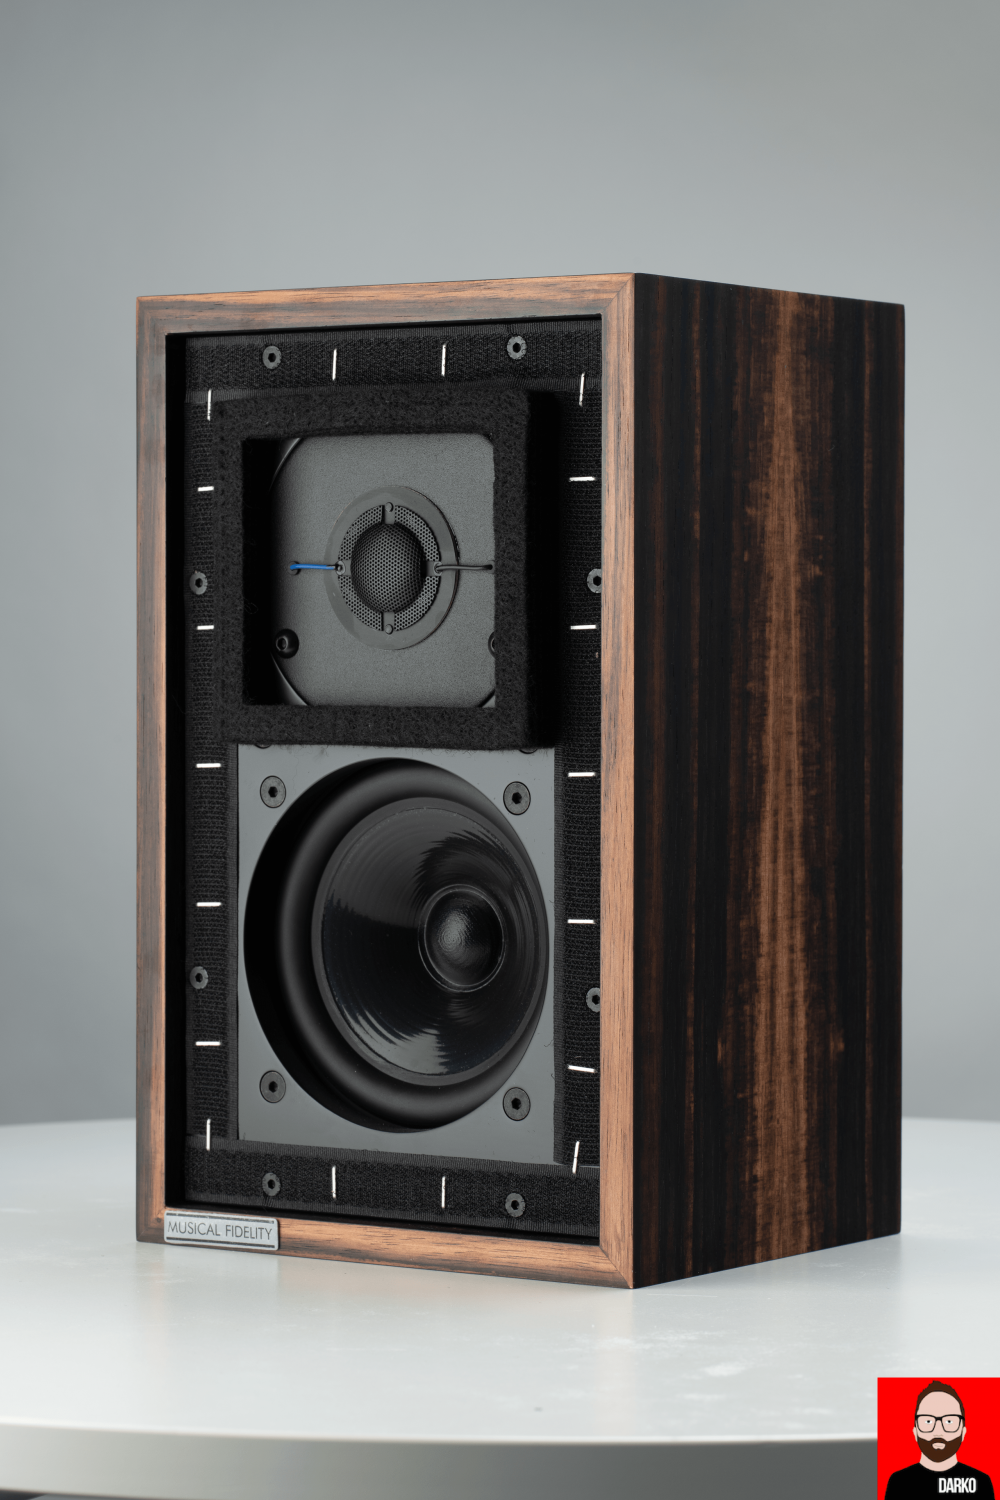 musical-fidelity-ls35a-darkoaudio-2.png